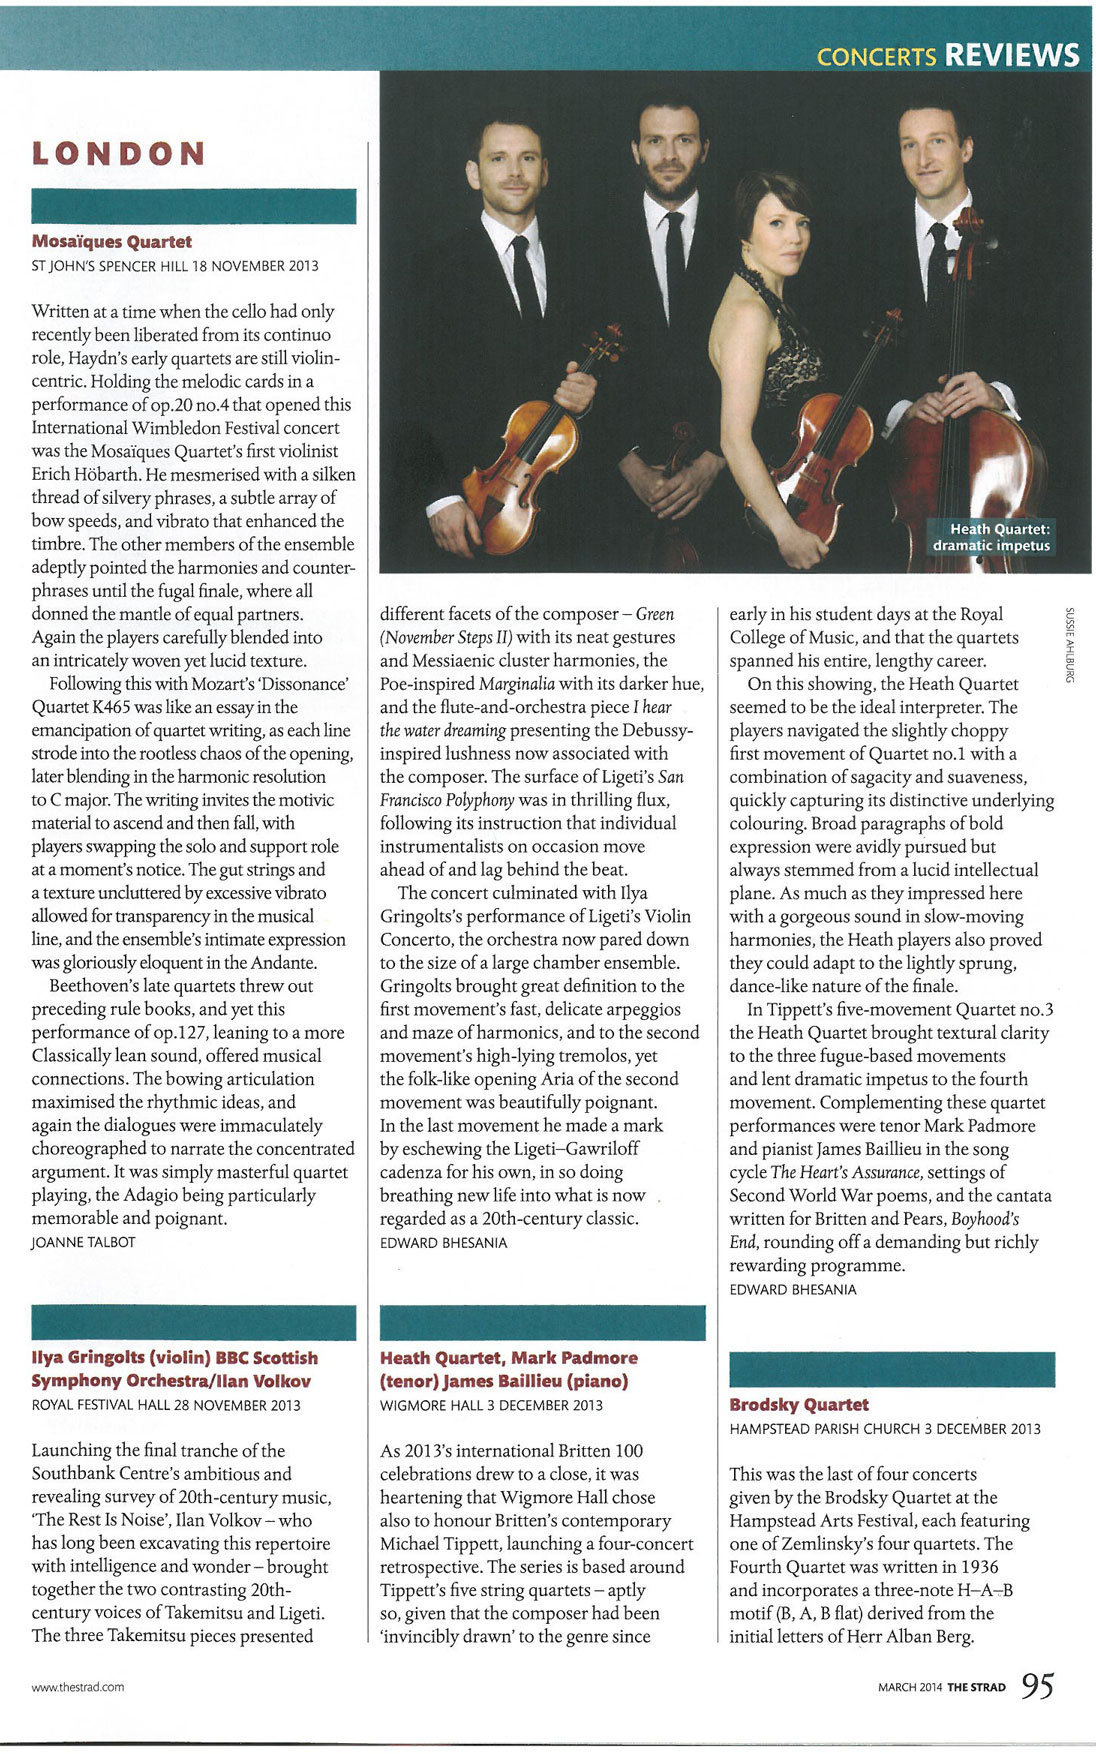 Review, 2014, The Strad